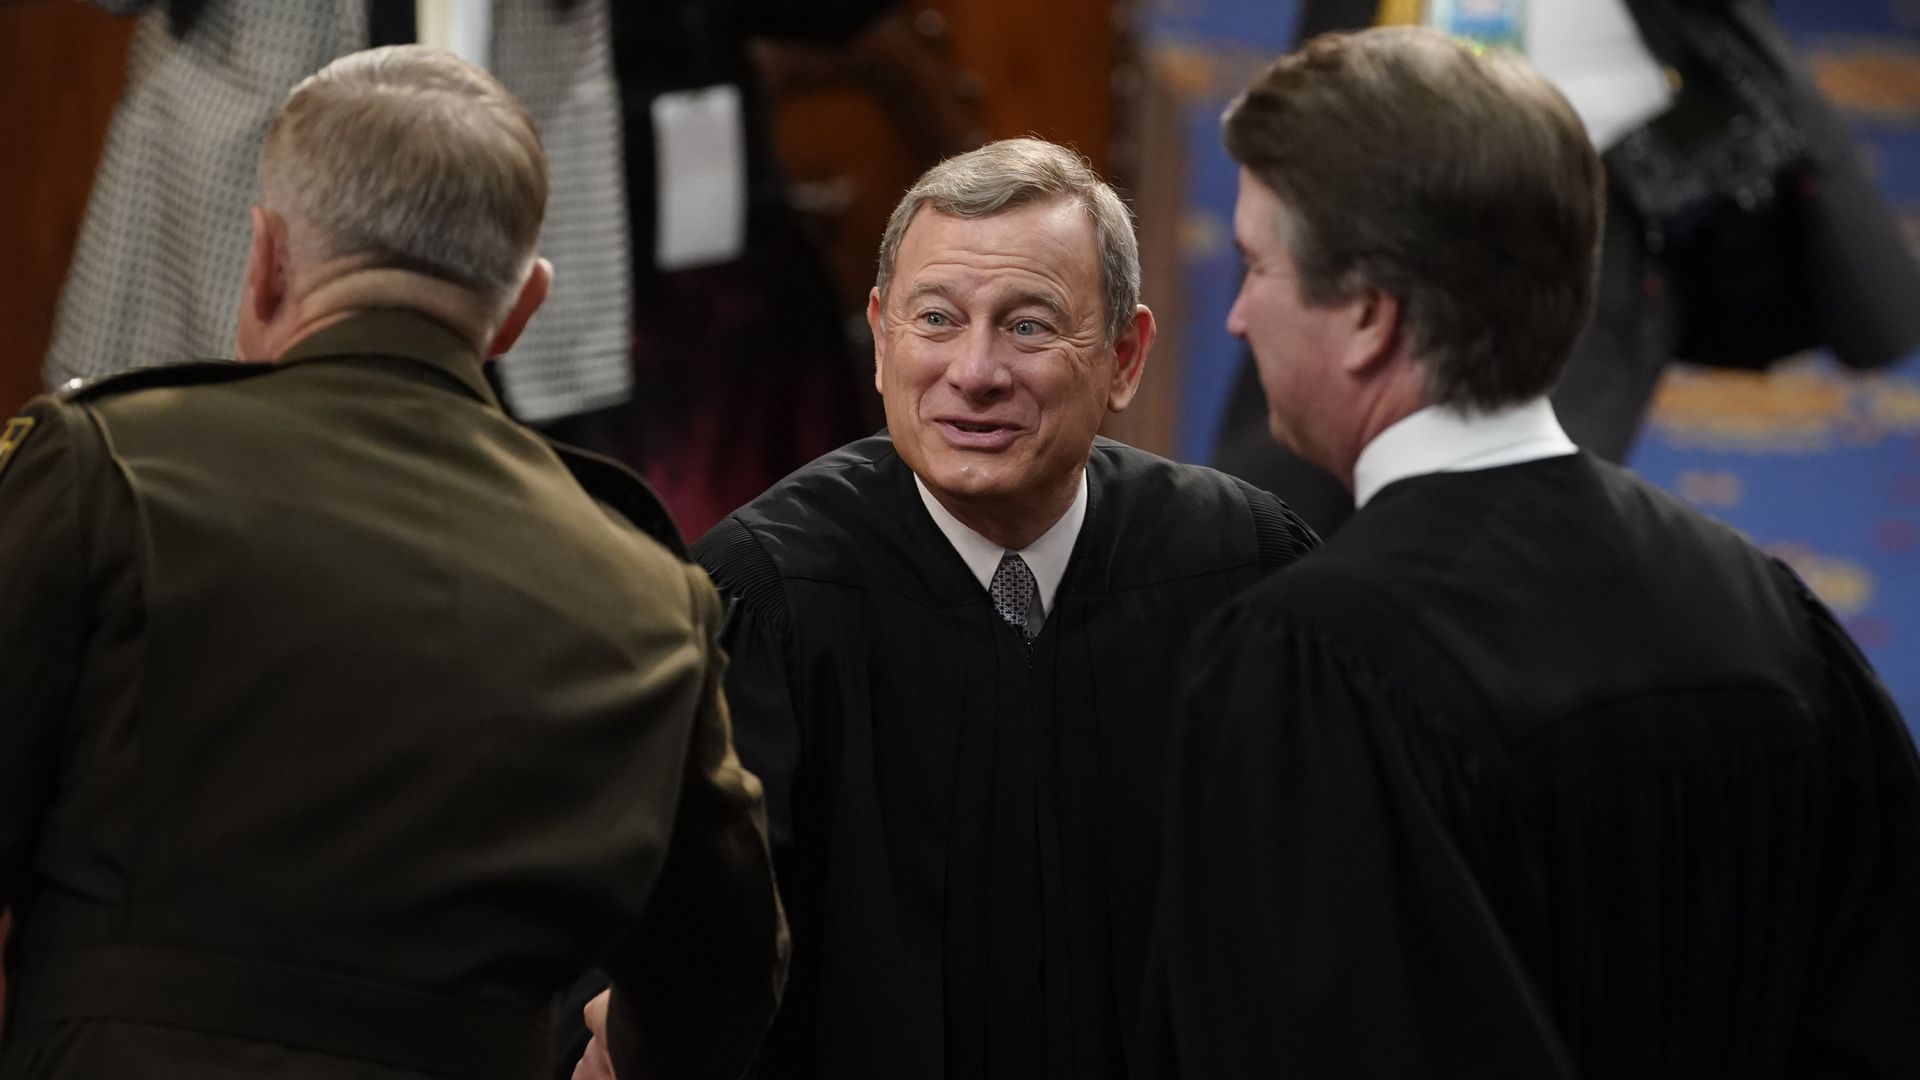 John Roberts, chief justice of the U.S. Supreme Court, center, attends the State of the Union.